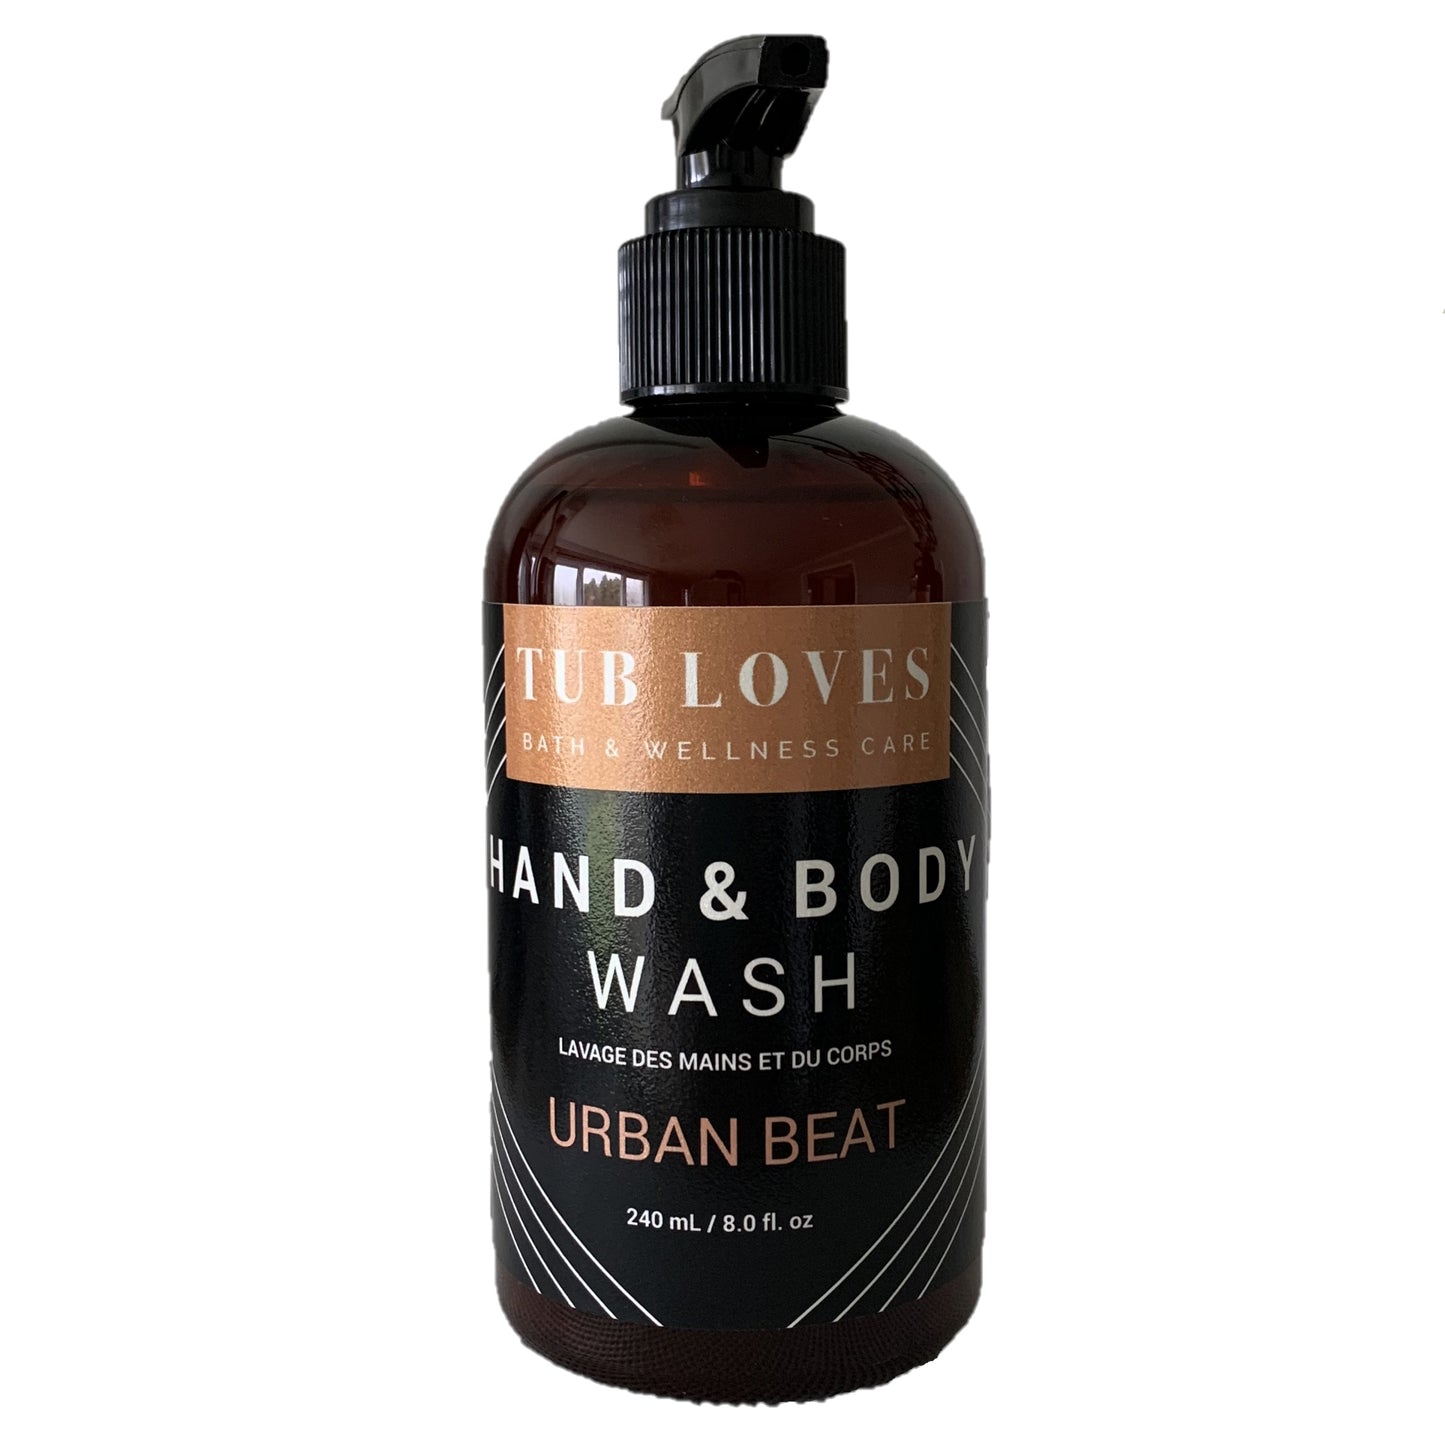 Urban Beat - Hand and Body Wash - Tub Loves